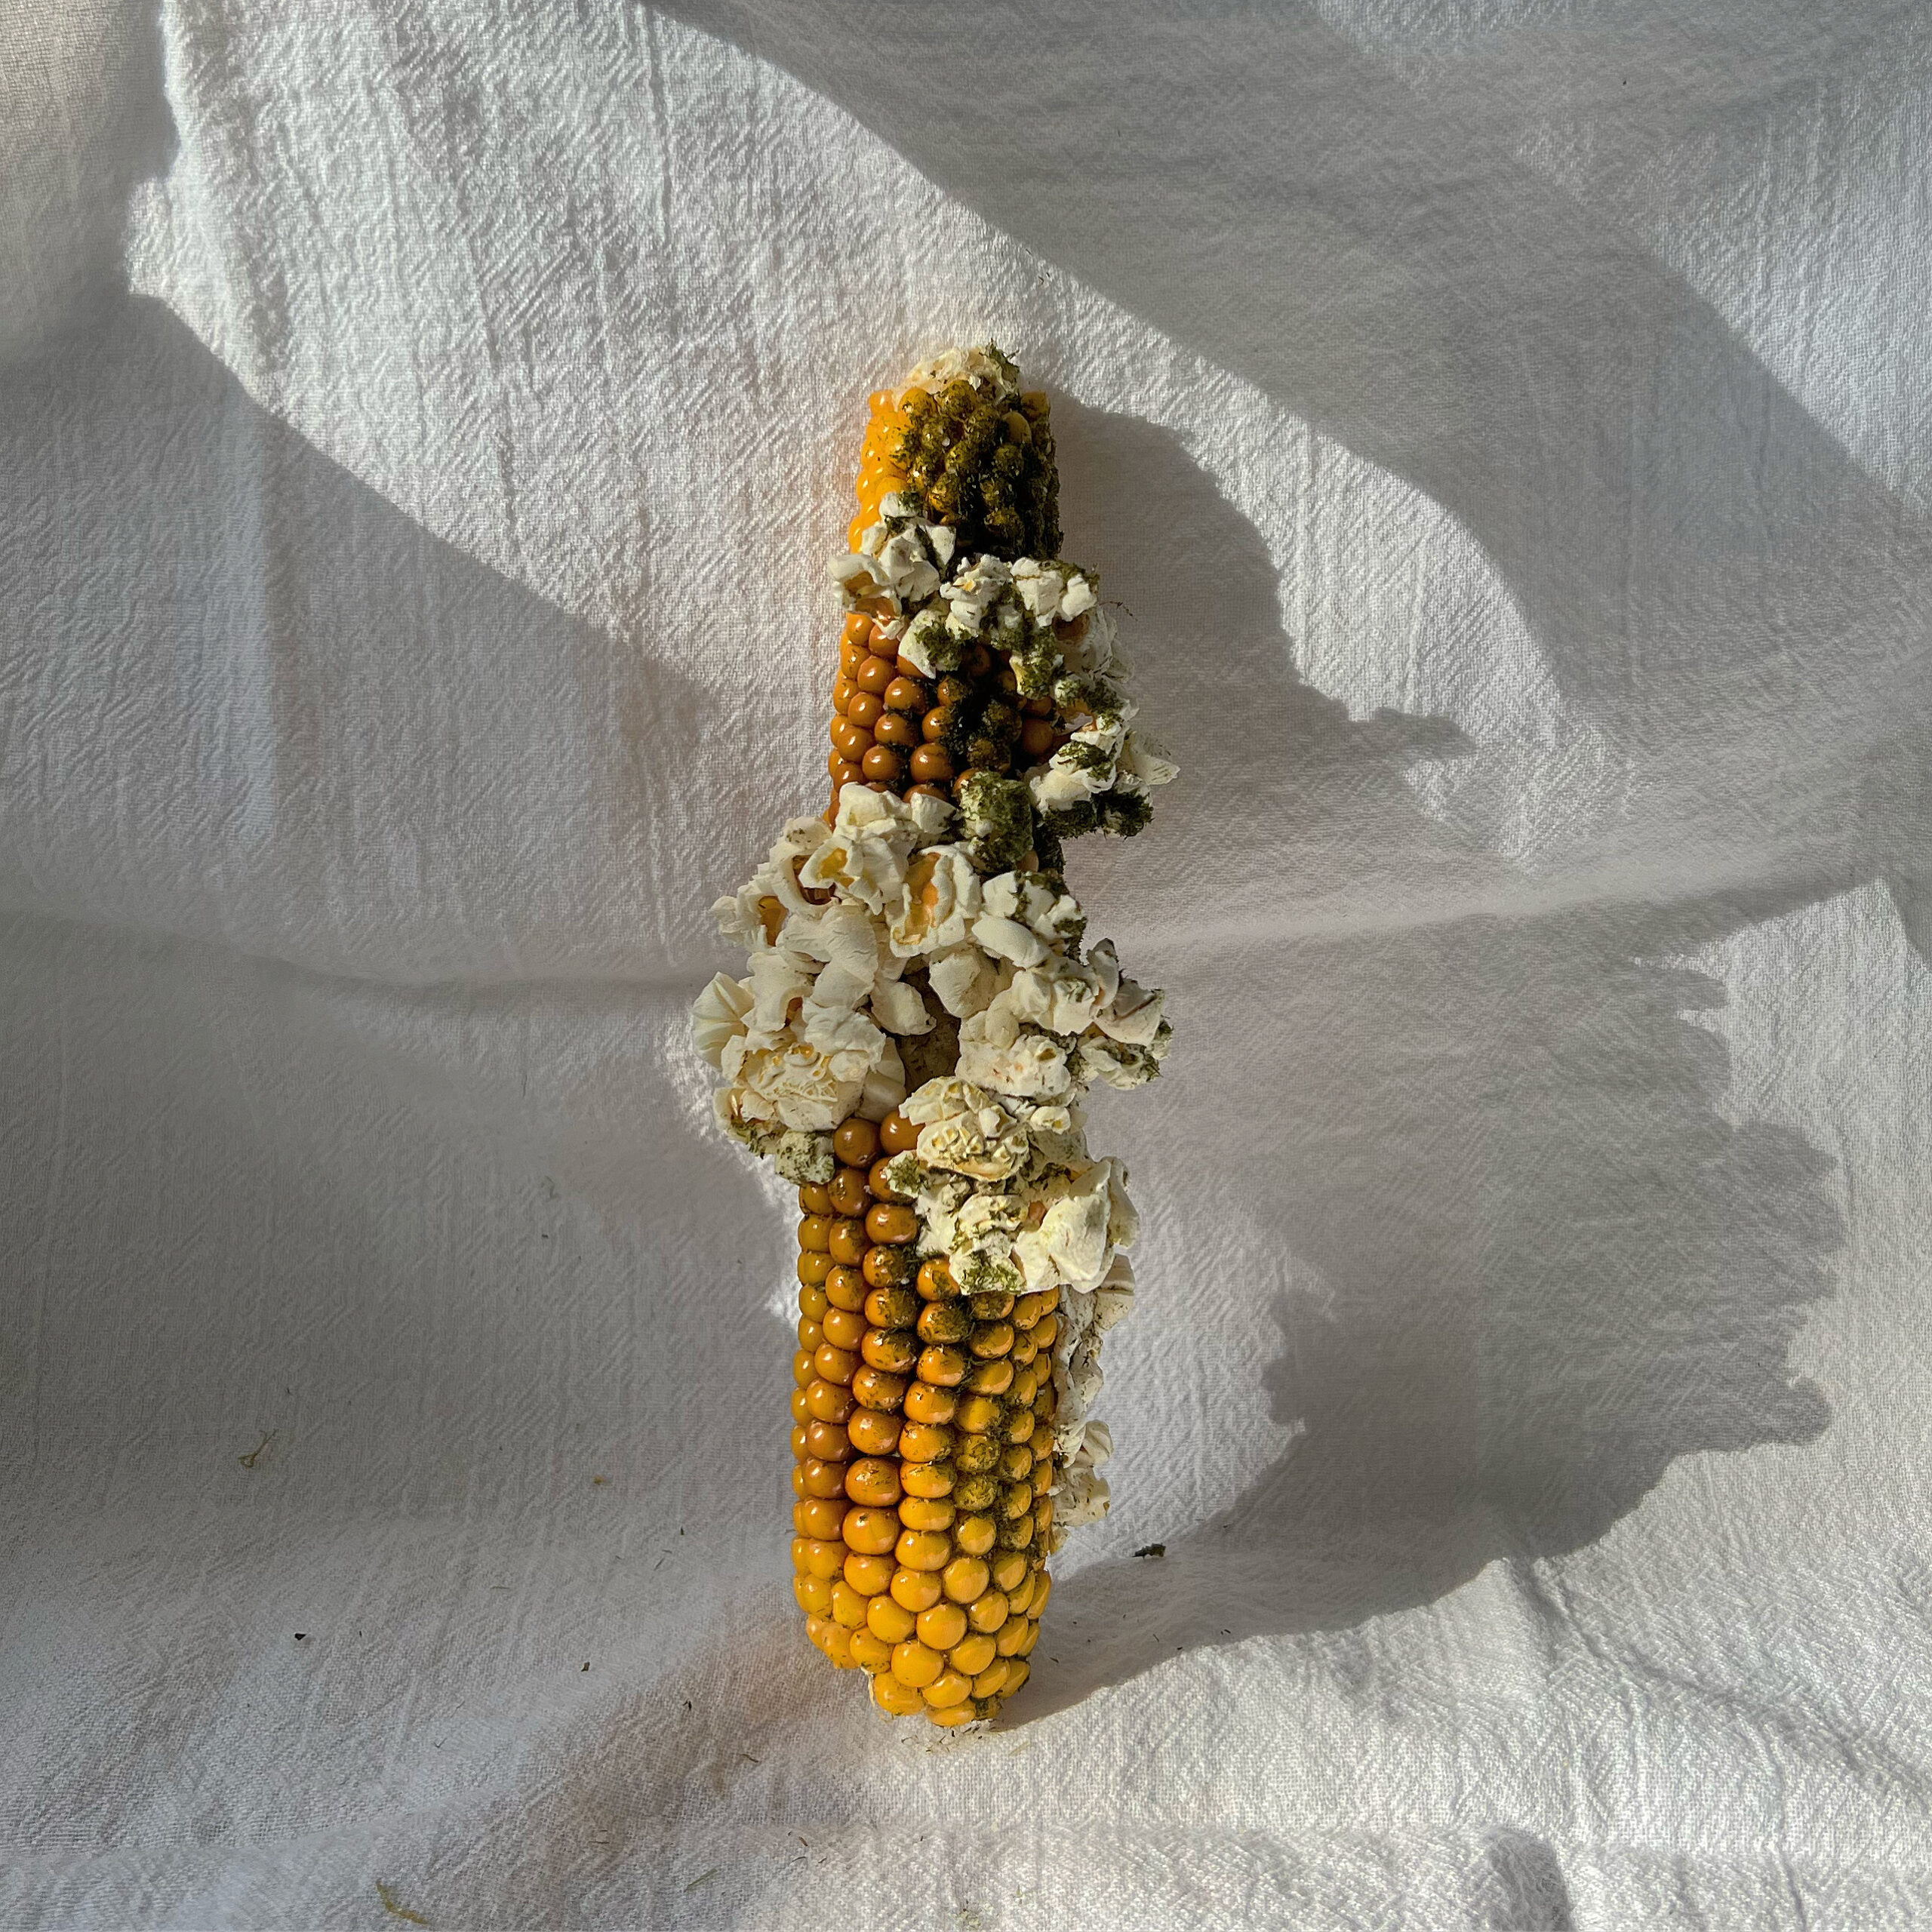 A yellow corn cob stands against a white background, a handful of kernels have popped so that popped corn appears sporadically on the cob.